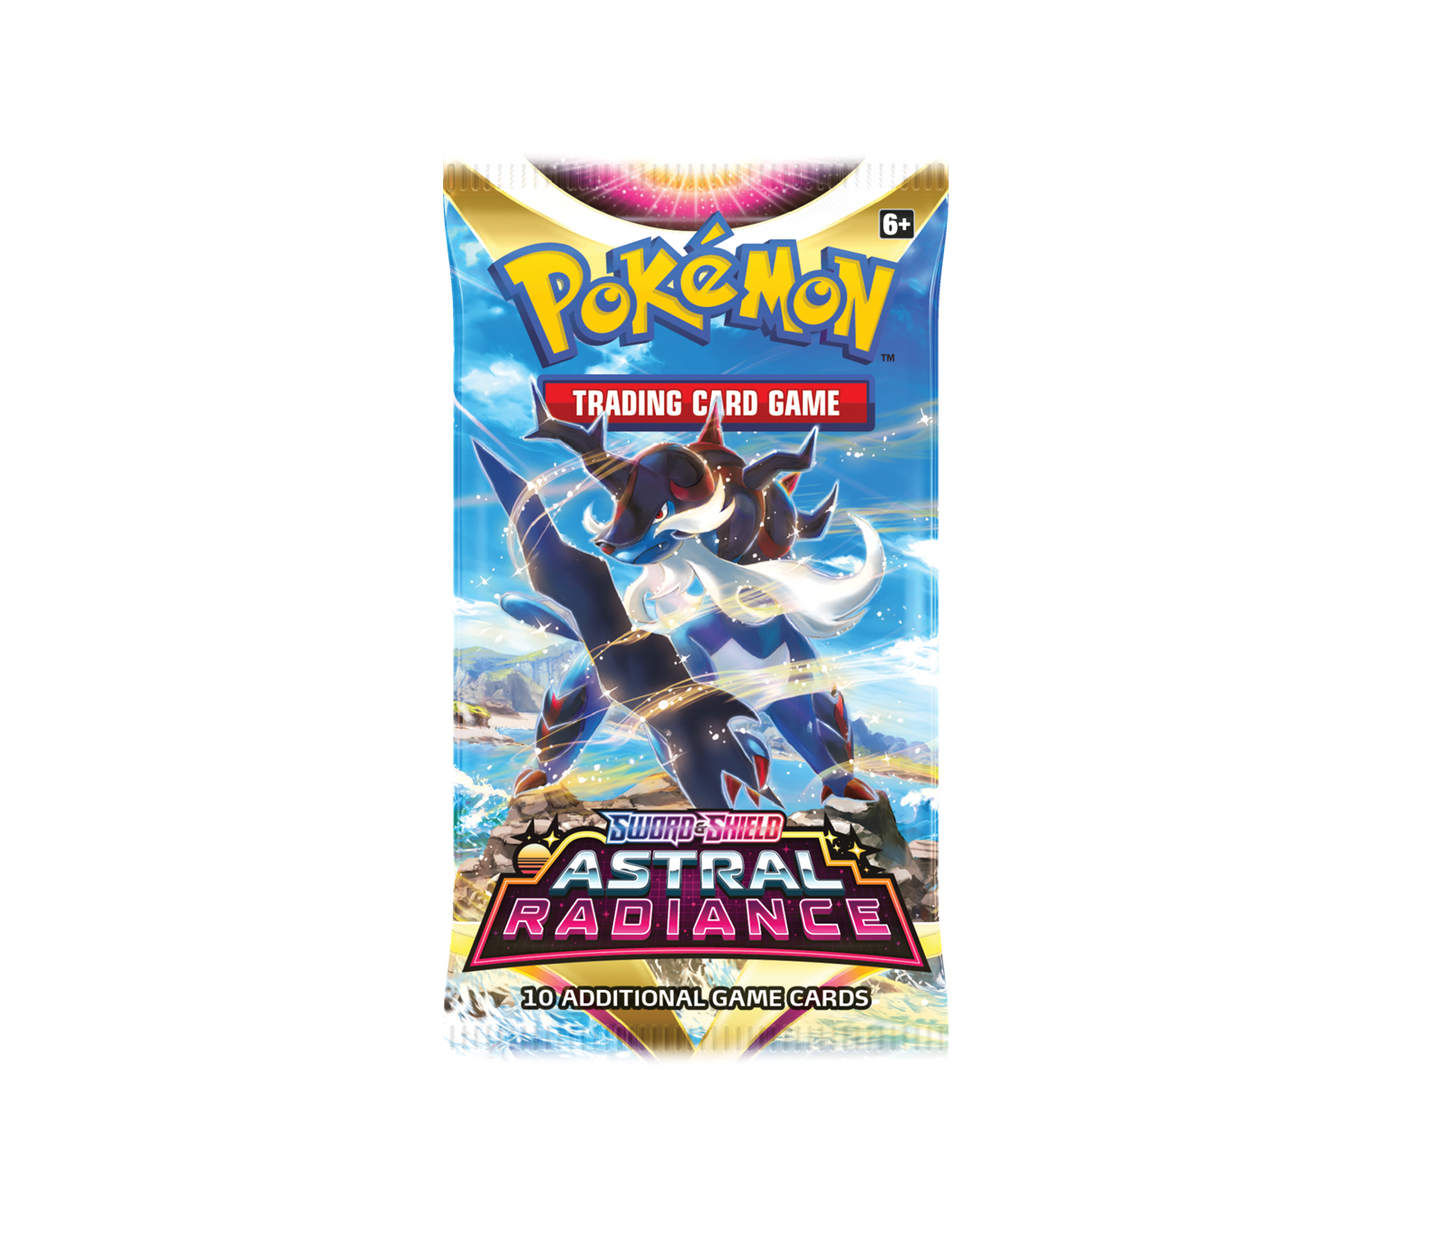 Pokémon TCG booster Sword & Shield Astral Radiance Boosterpack